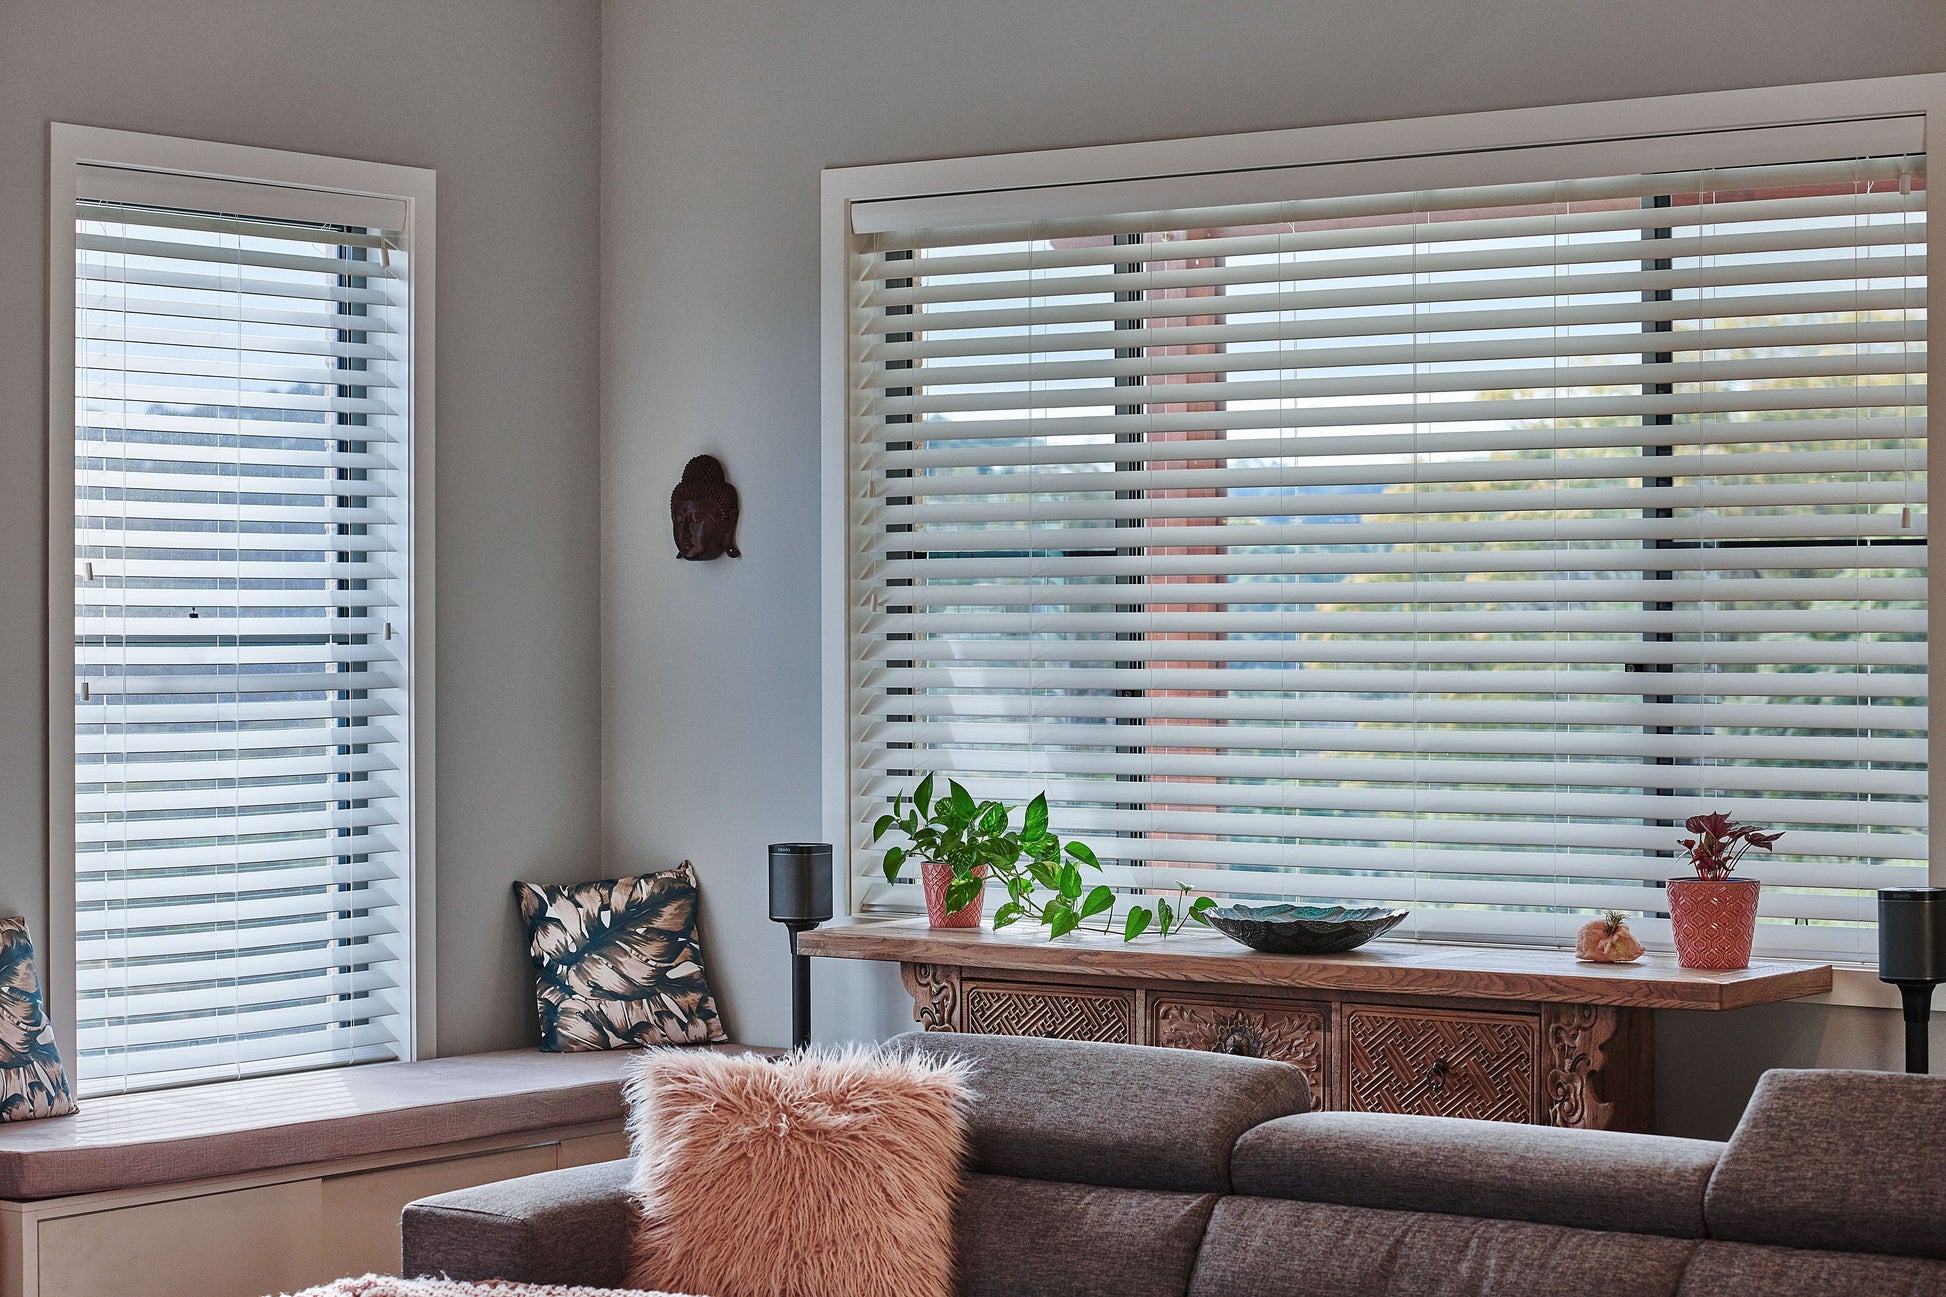  - SmartPrivacy Normandy Timber Venetian Blinds by Norman By Norman || Material World